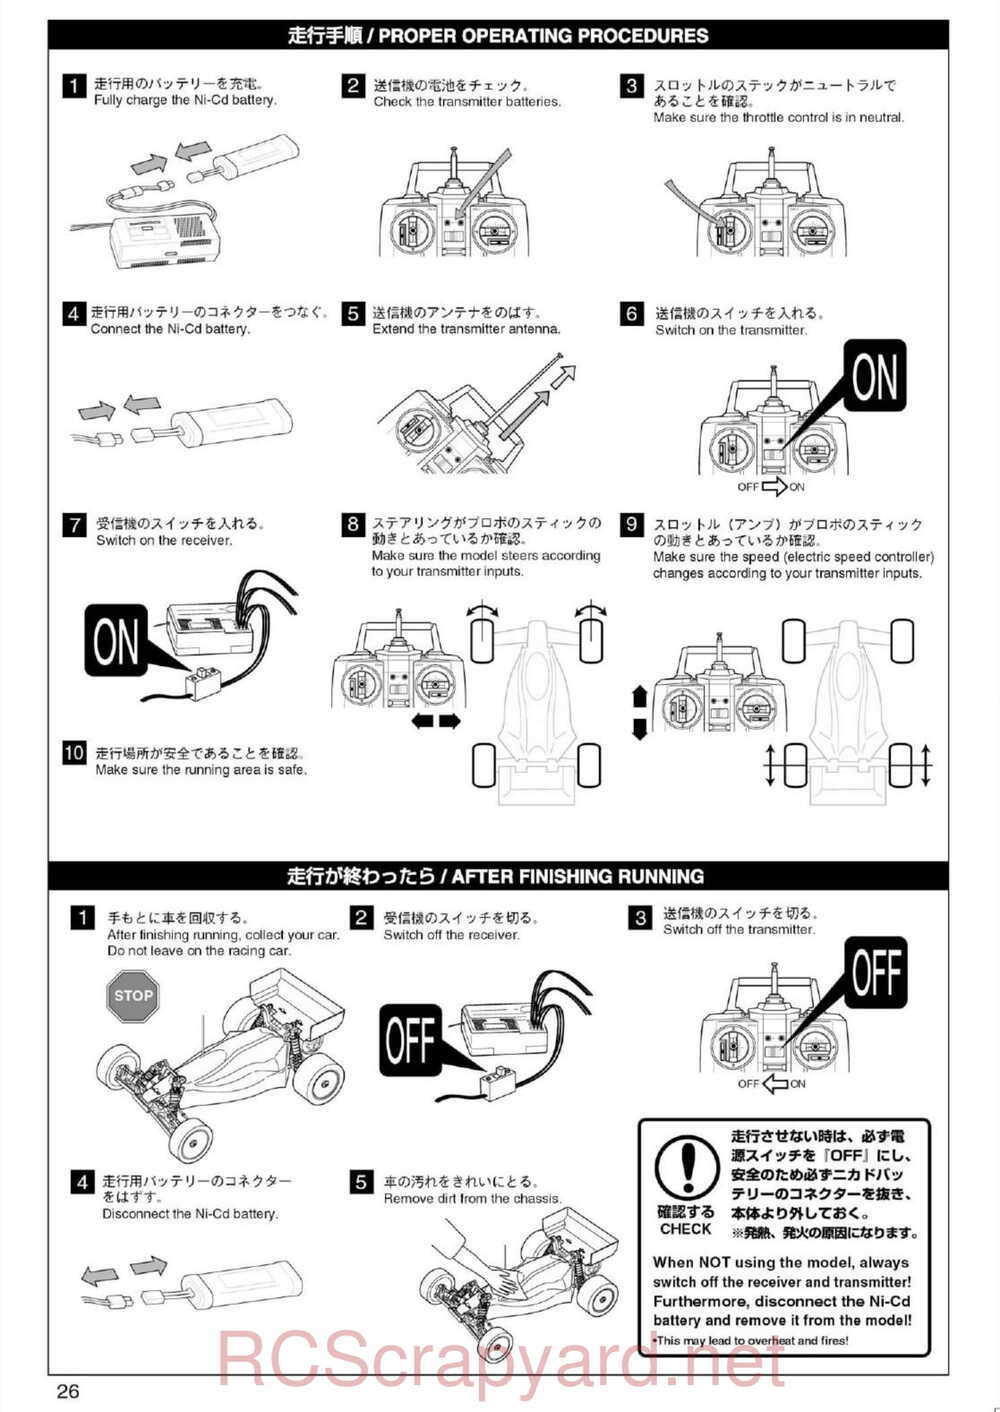 Kyosho - 30074 - Ultima-RB5 - Manual - Page 26